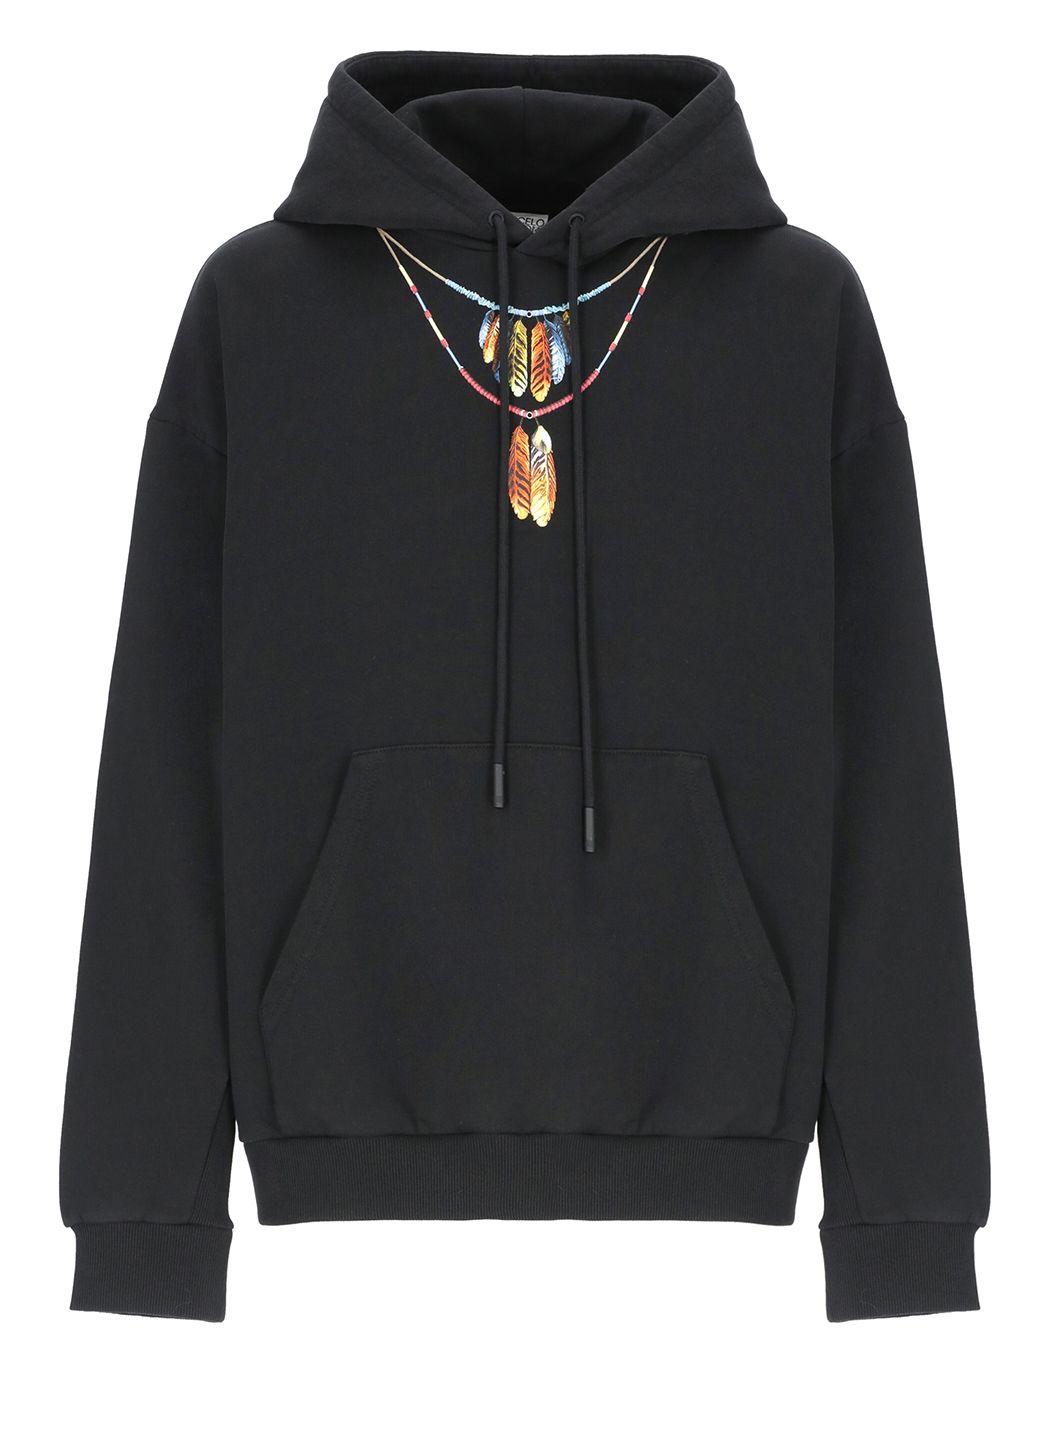 Feathers Necklace hoodie